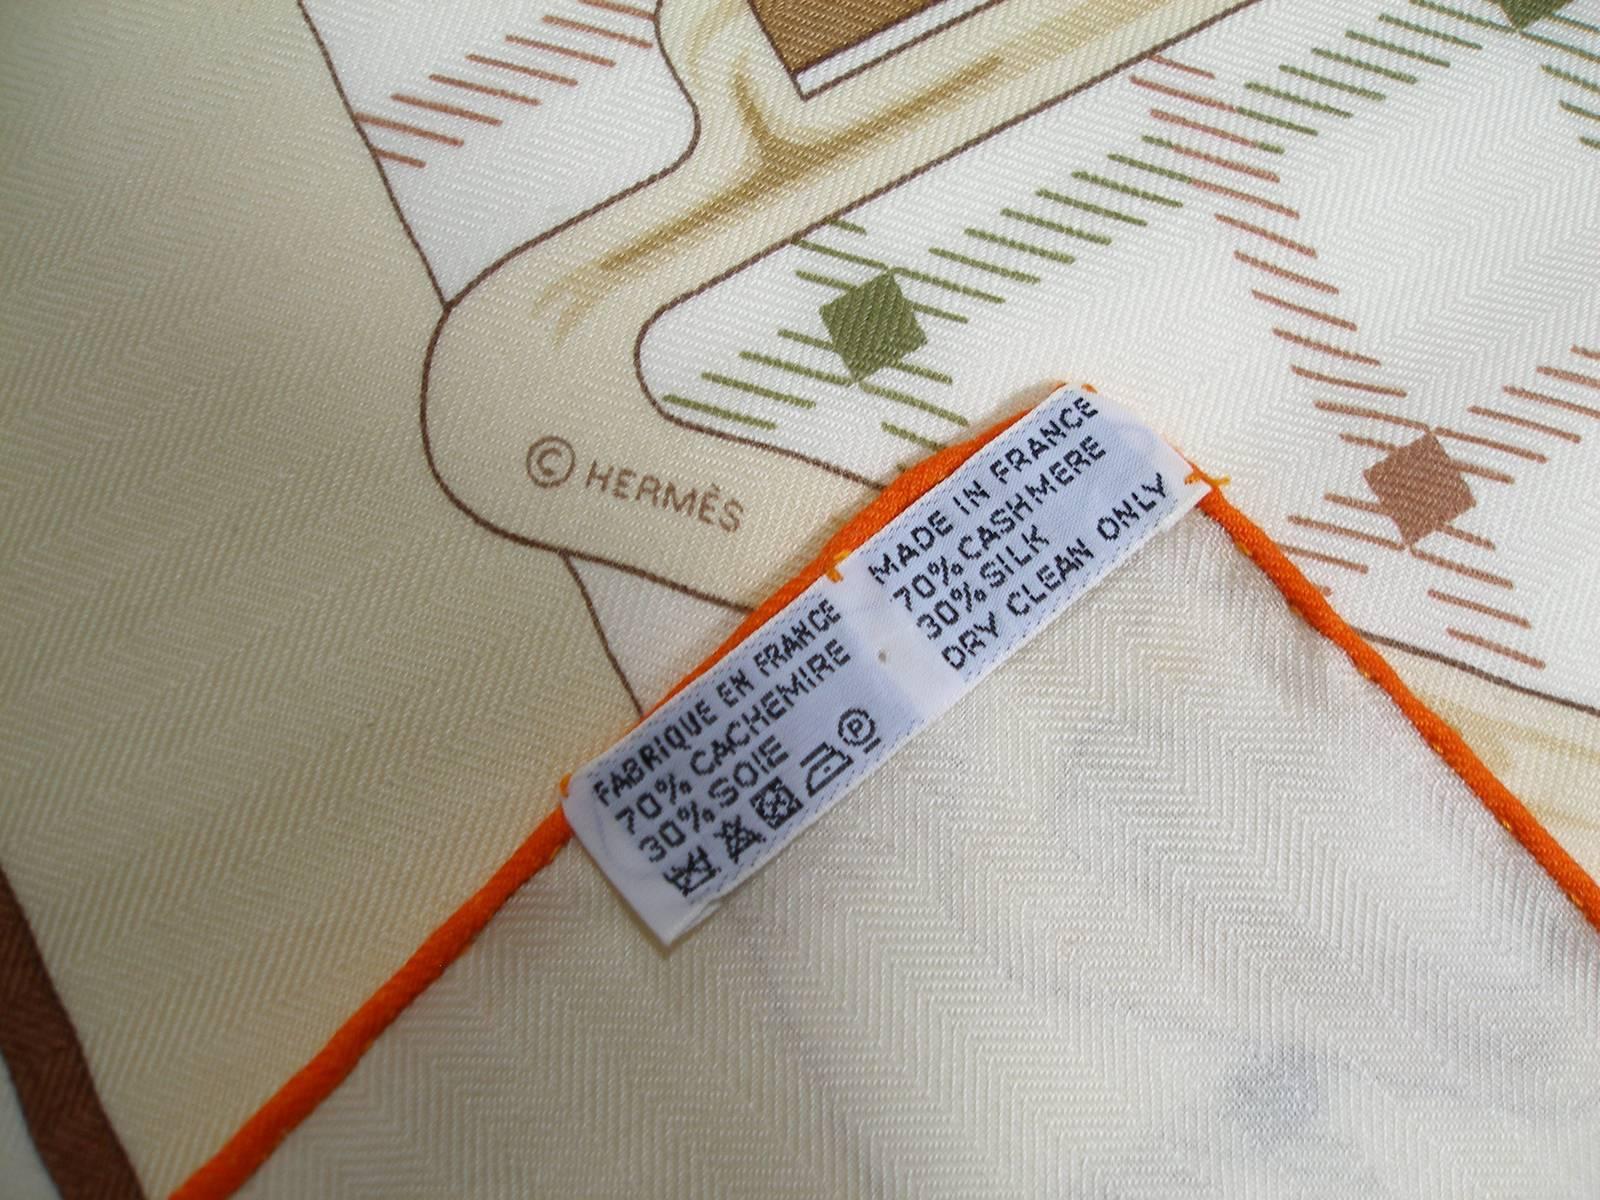 Hermès 140cm or 55 Inch GM Shawl Tatersale By Henri d'Origny Cashmere Brand New For Sale 1